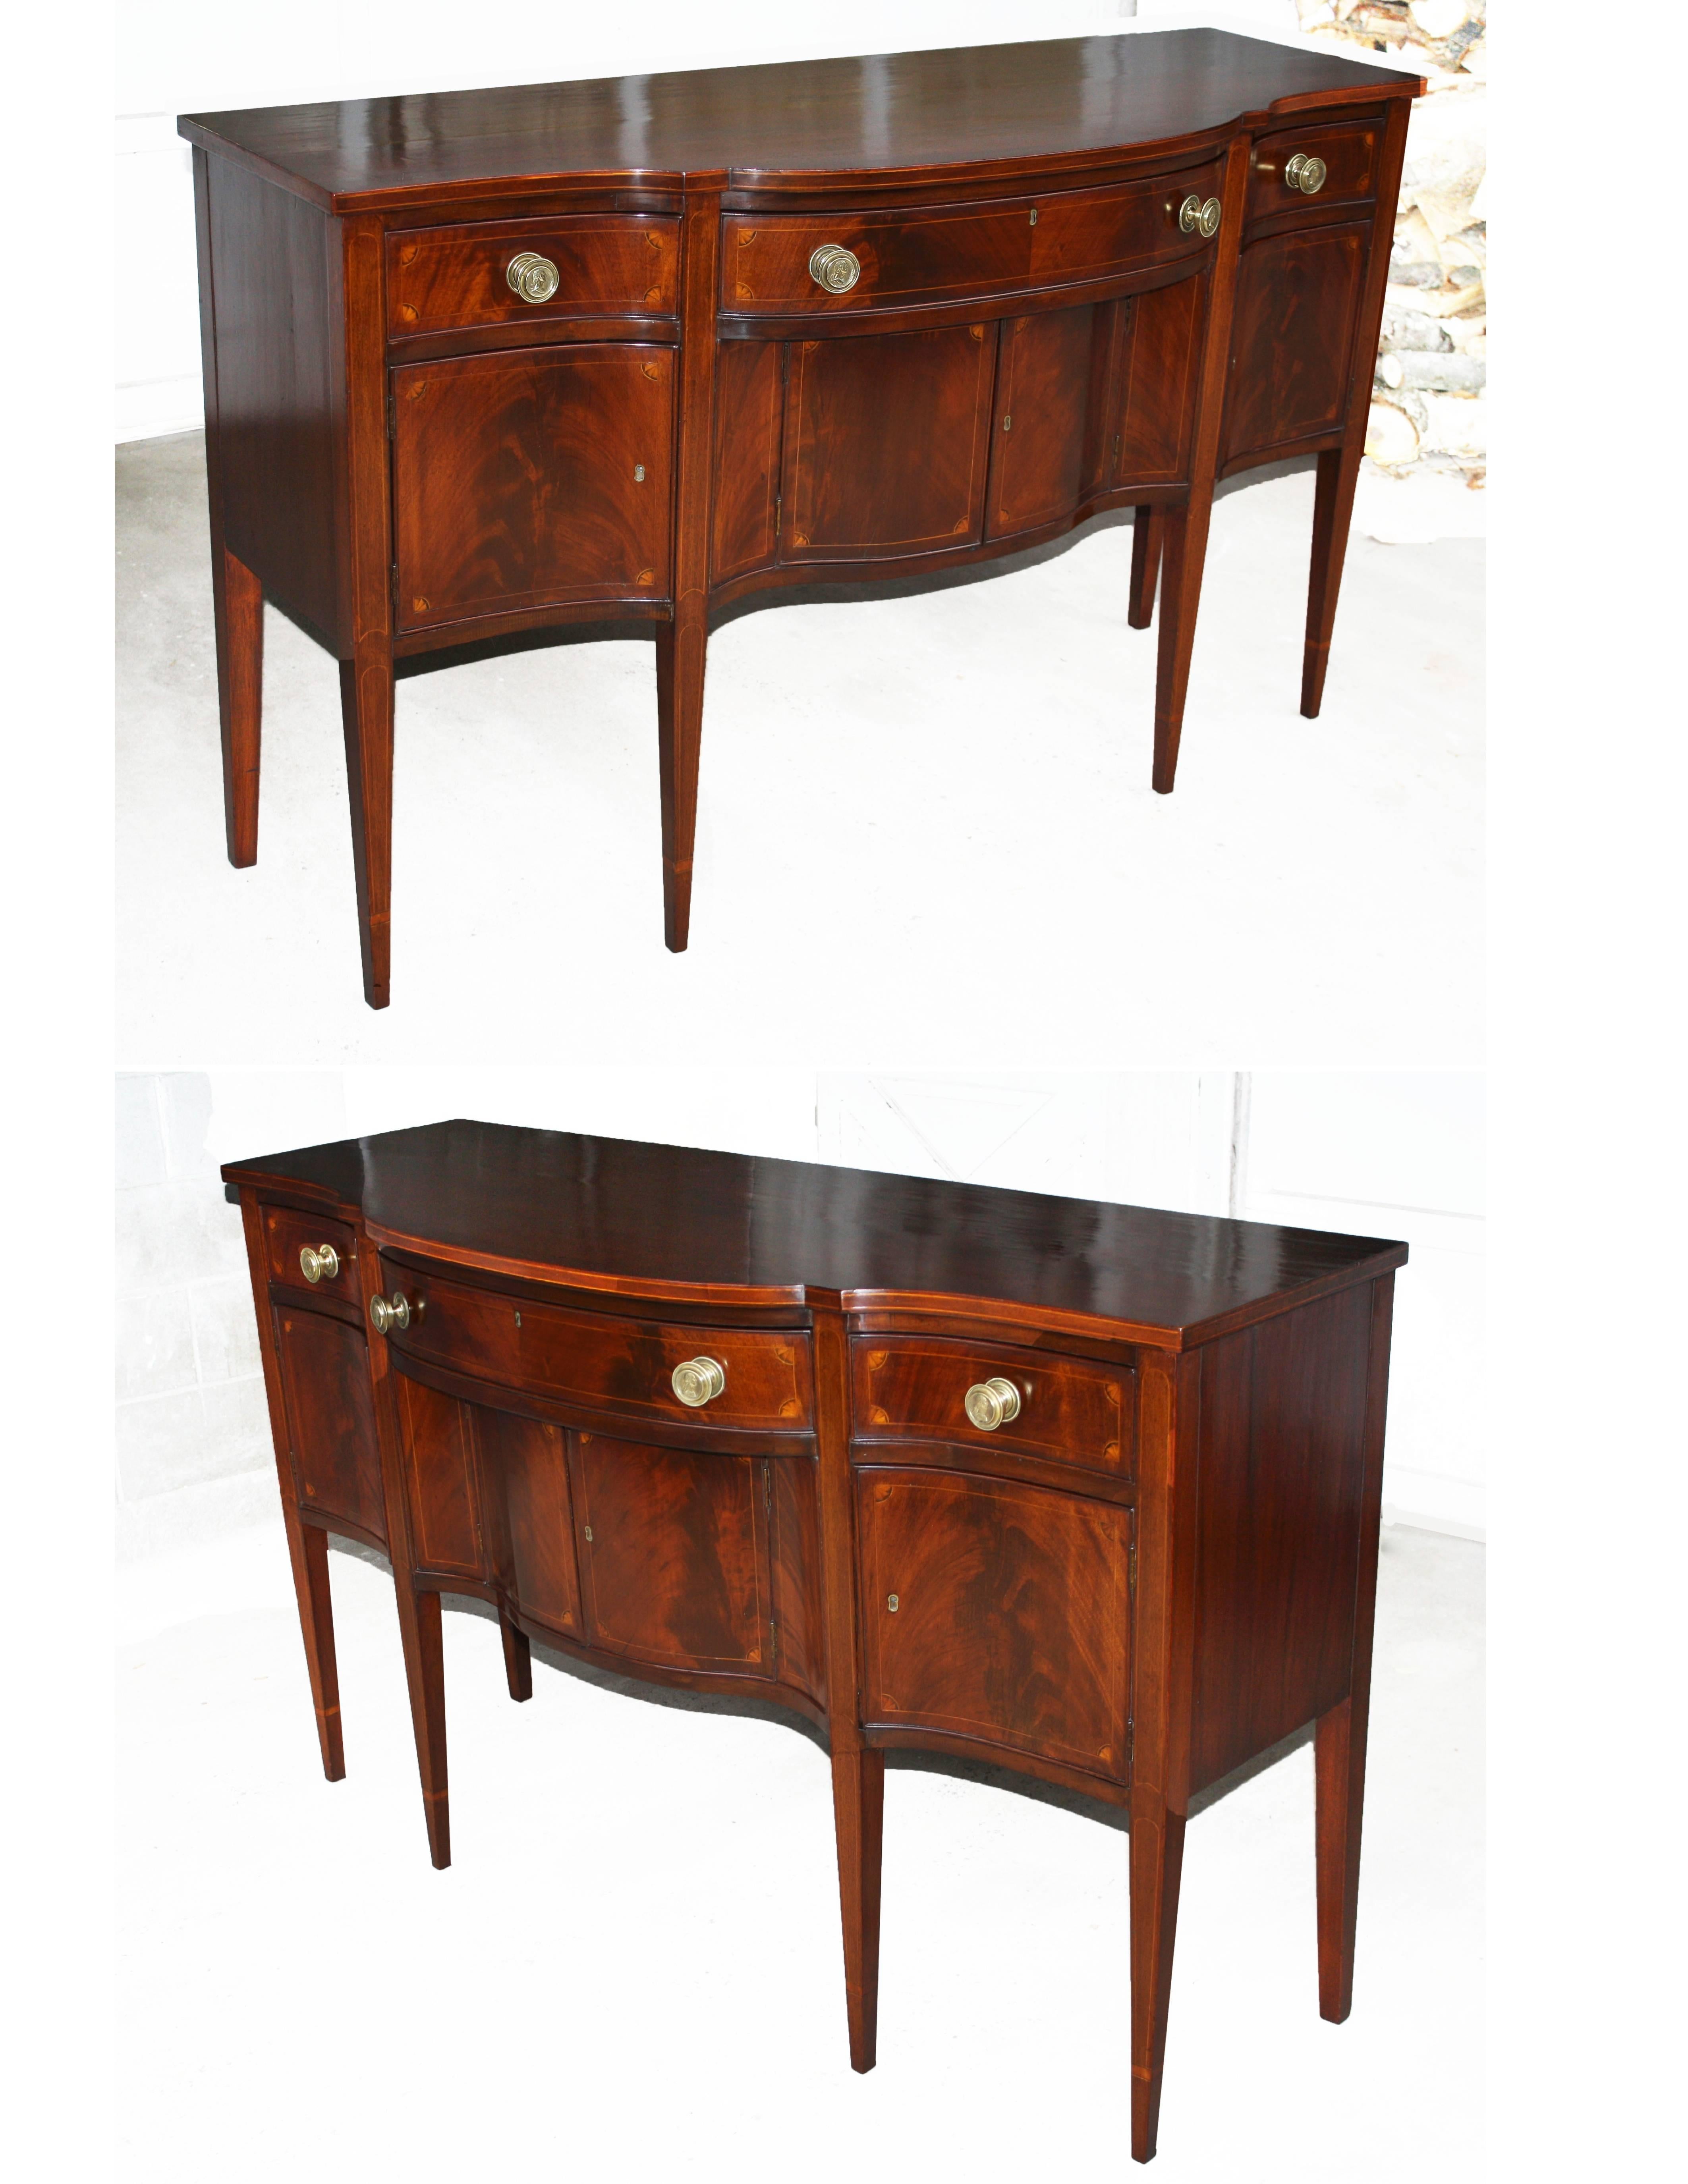 In the Hepplewhite manner, an American Federal period satinwood fan and string inlaid mahogany sideboard of Southern origin.  Drawer and door fronts are crotch mahogany veneered.  The four brass drawer pulls are 'after' the Houdon Bust of George